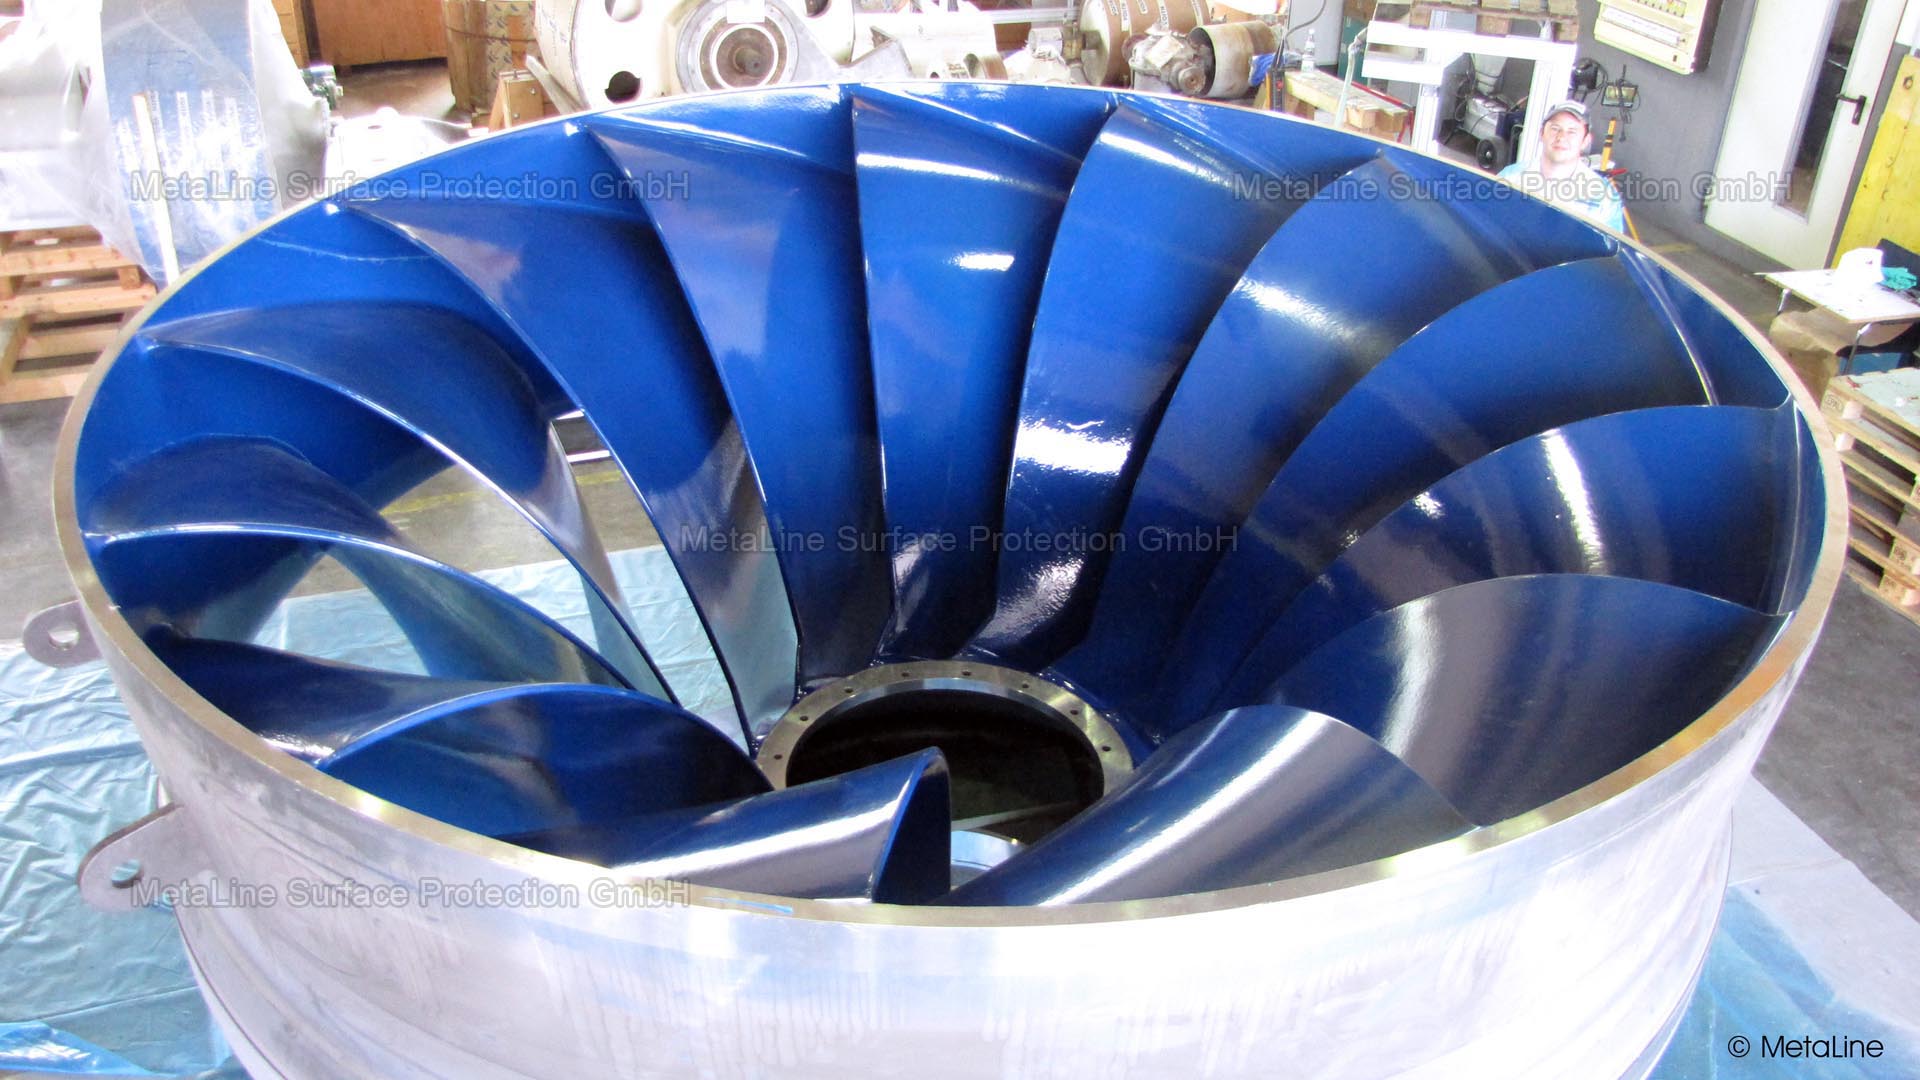 <!-- START: ConditionalContent --><!-- END: ConditionalContent -->   <!-- START: ConditionalContent --> Impeller; Turbine; Kaplan; Francis; Wear; Erosion; Corrosion; Cavitation; Repair; Wear-resistant; Coating; Ceramic; Guide Blade; Guide vane; Wear-resistant; <!-- END: ConditionalContent -->   <!-- START: ConditionalContent --><!-- END: ConditionalContent -->   <!-- START: ConditionalContent --><!-- END: ConditionalContent -->